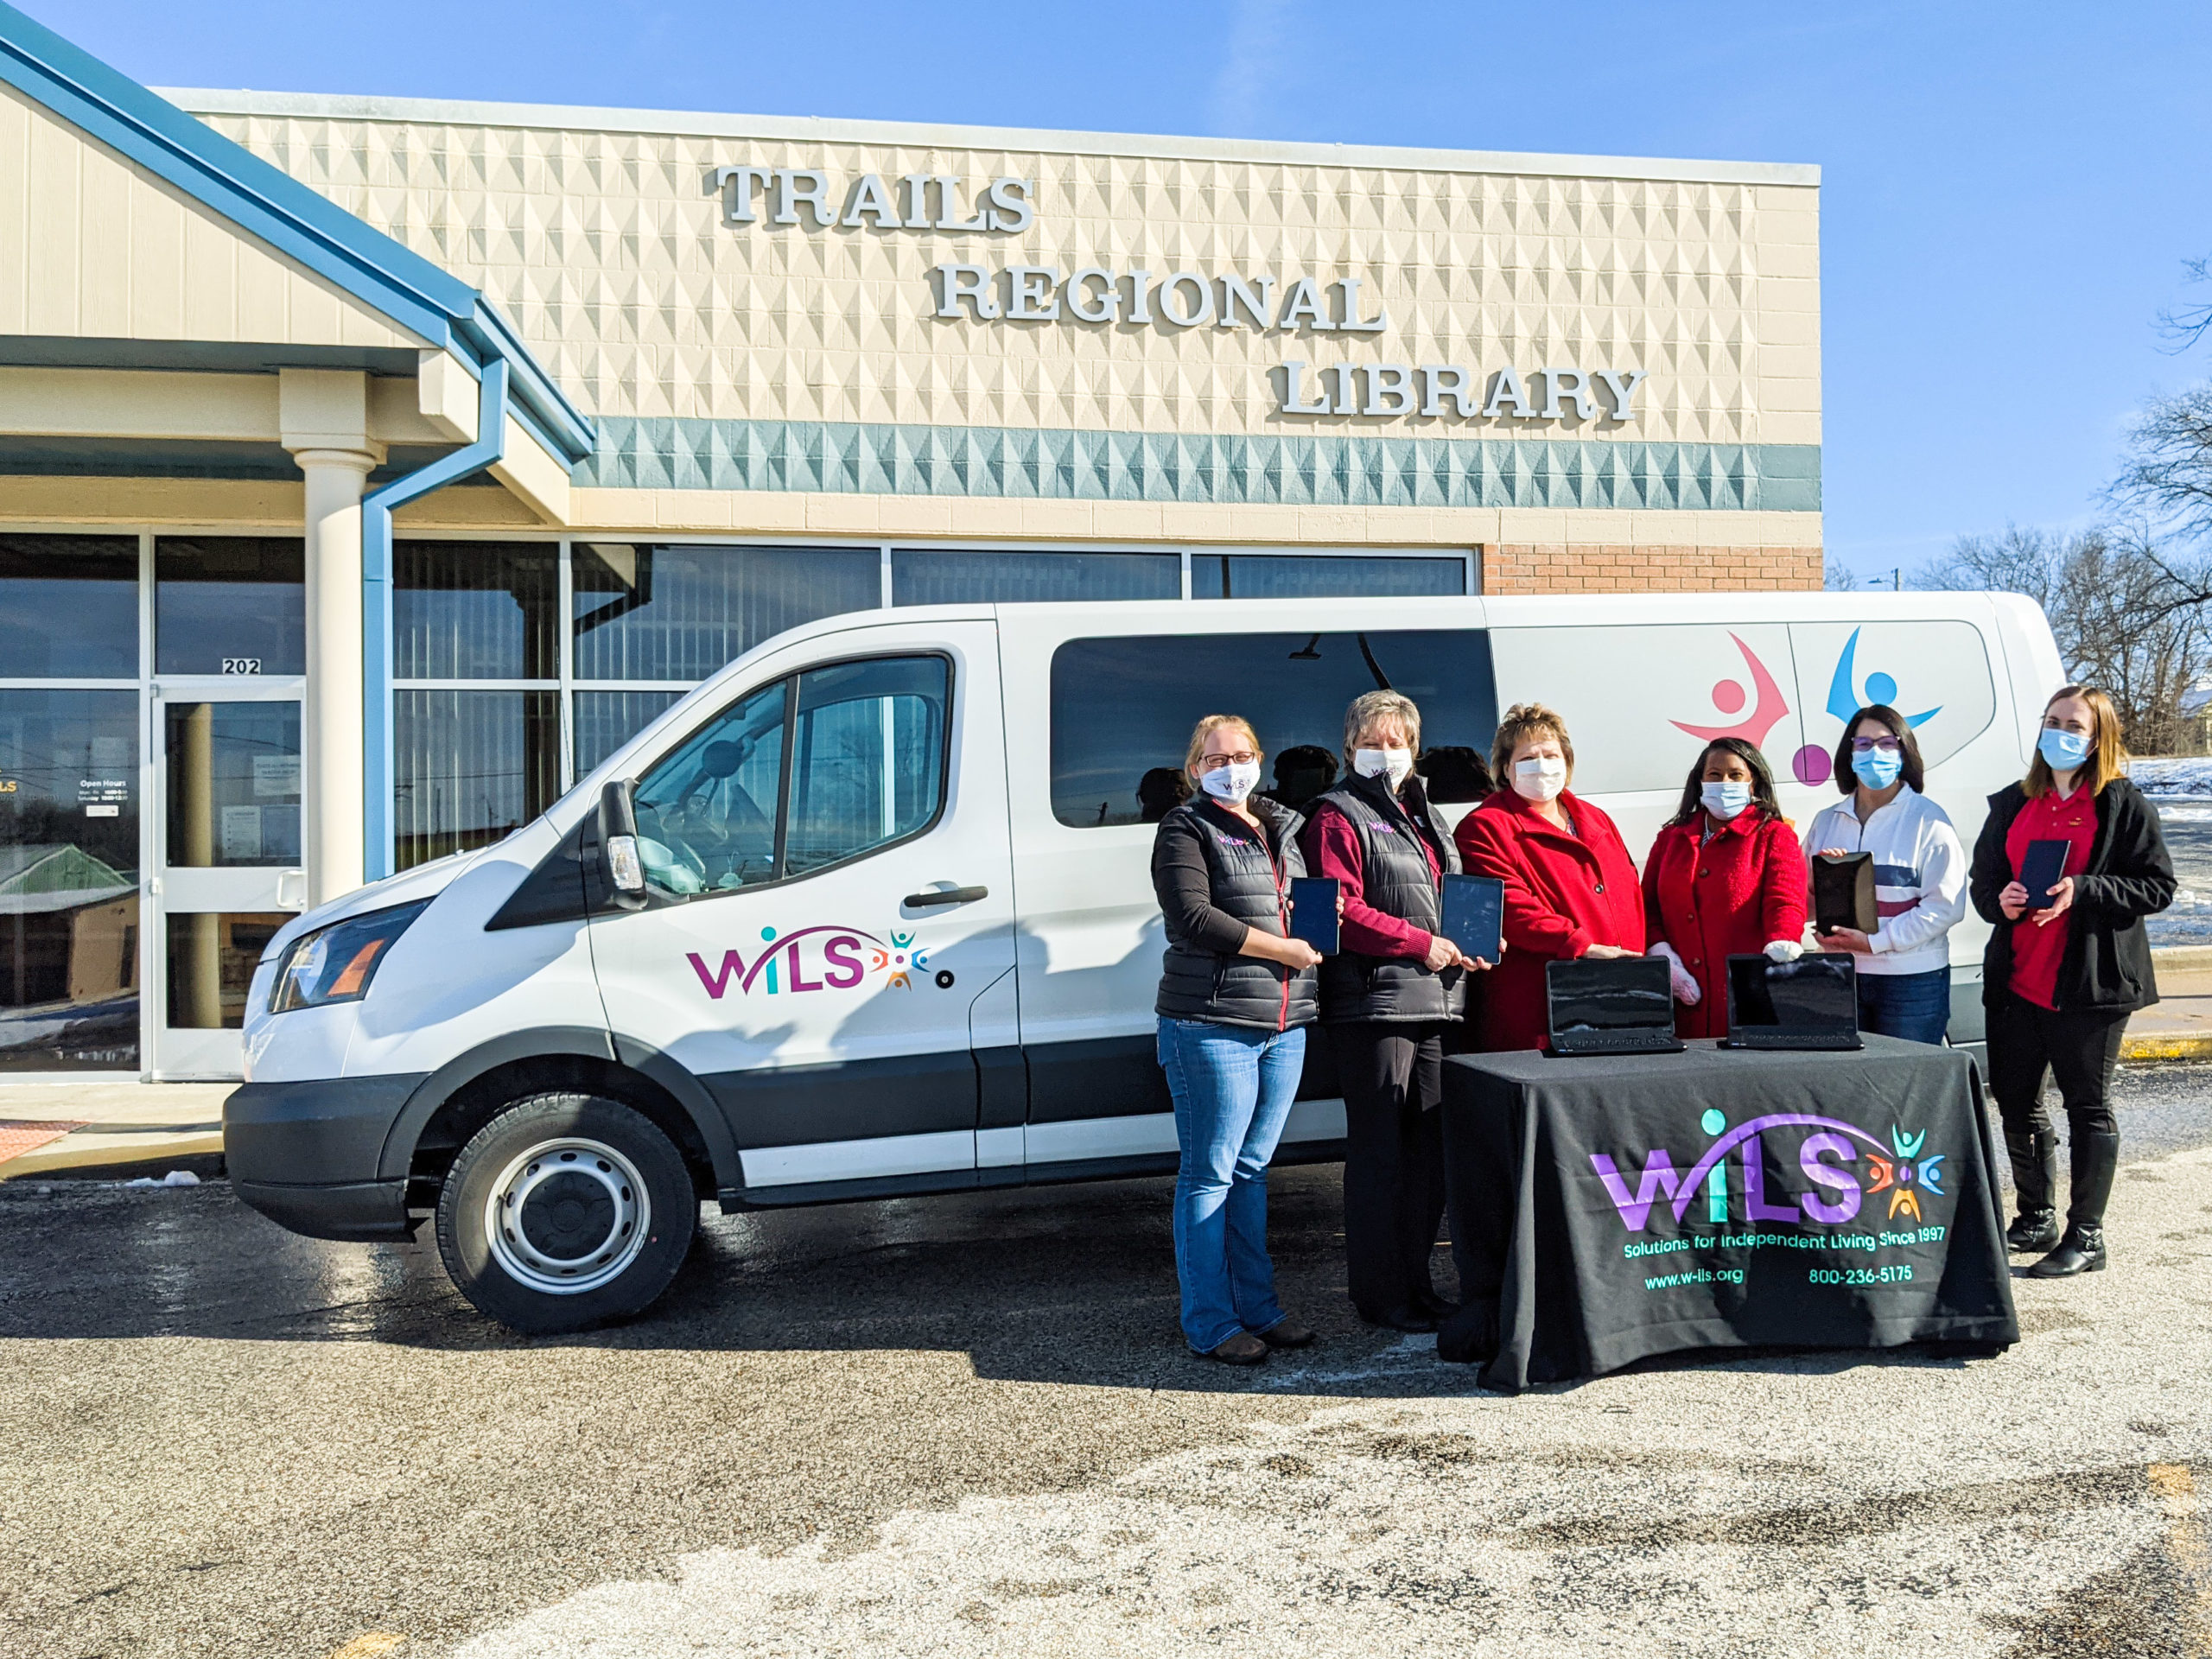 Ladies from Trails Regional and WILS stand behind a WILS table, in front of a WILS van that is parked in front of the Trails Regional Library in Knob Noster